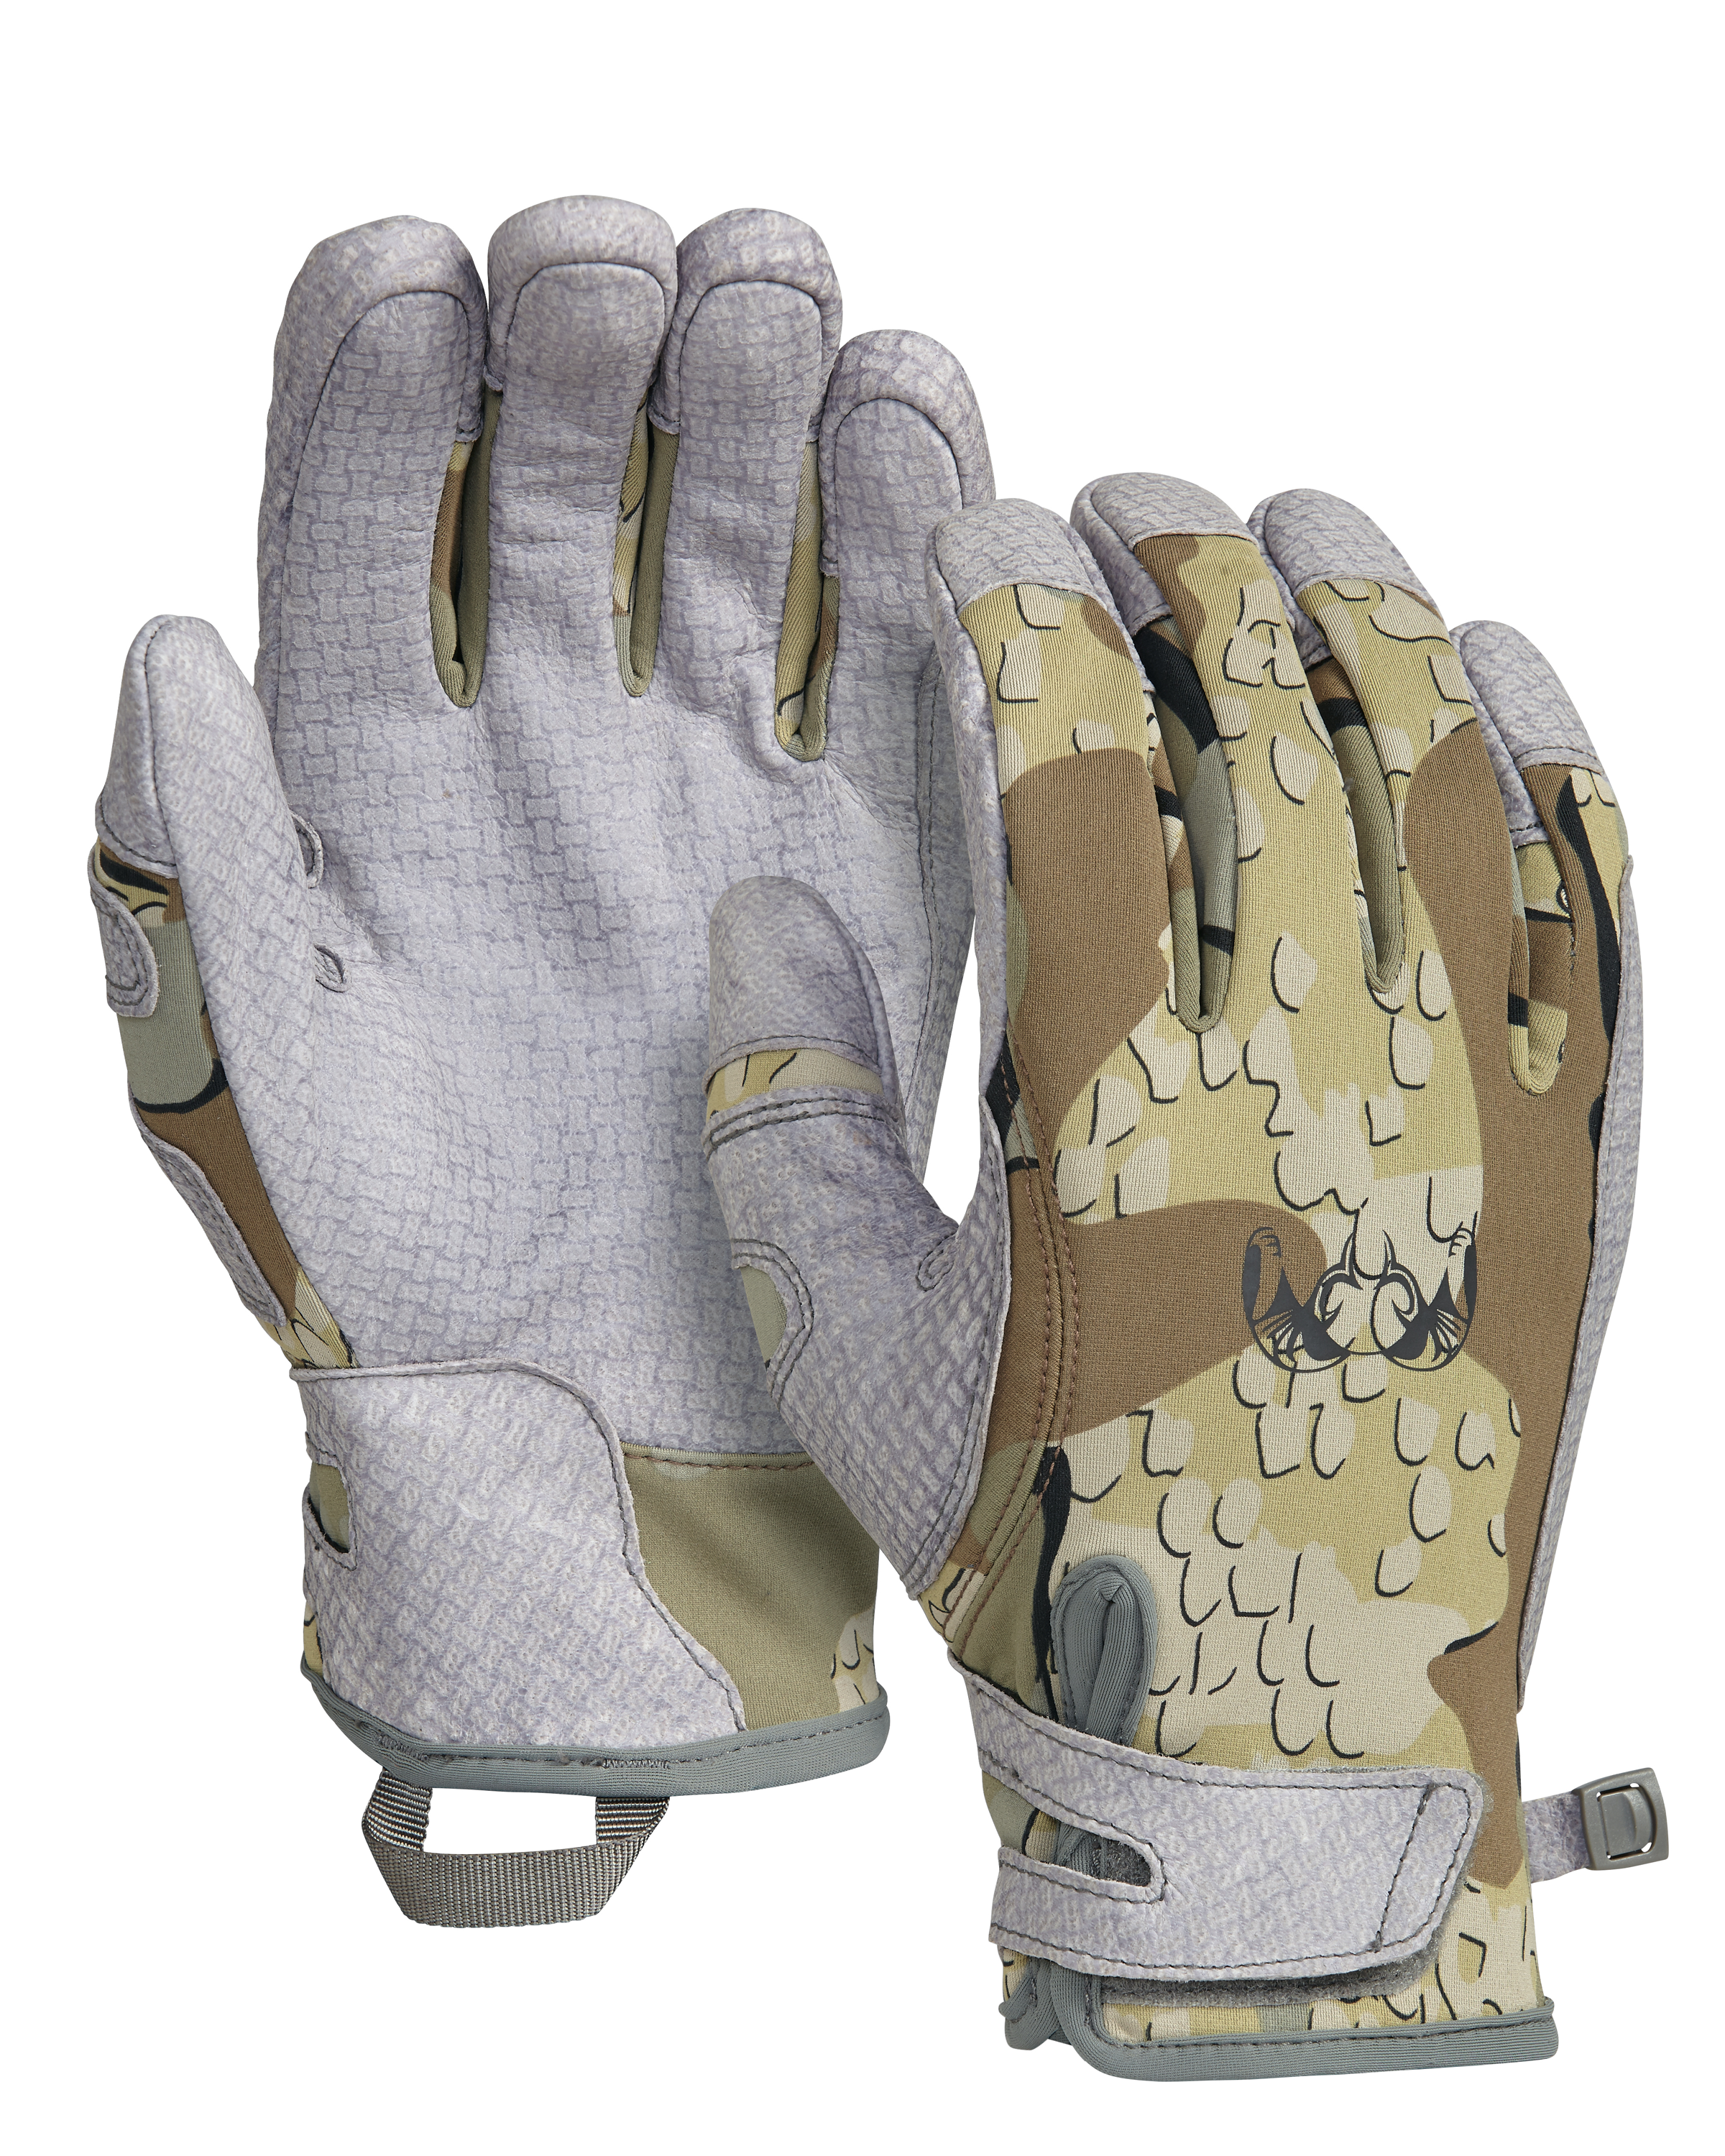 KUIU Guide X Hunting Glove in Valo | Size 2XL